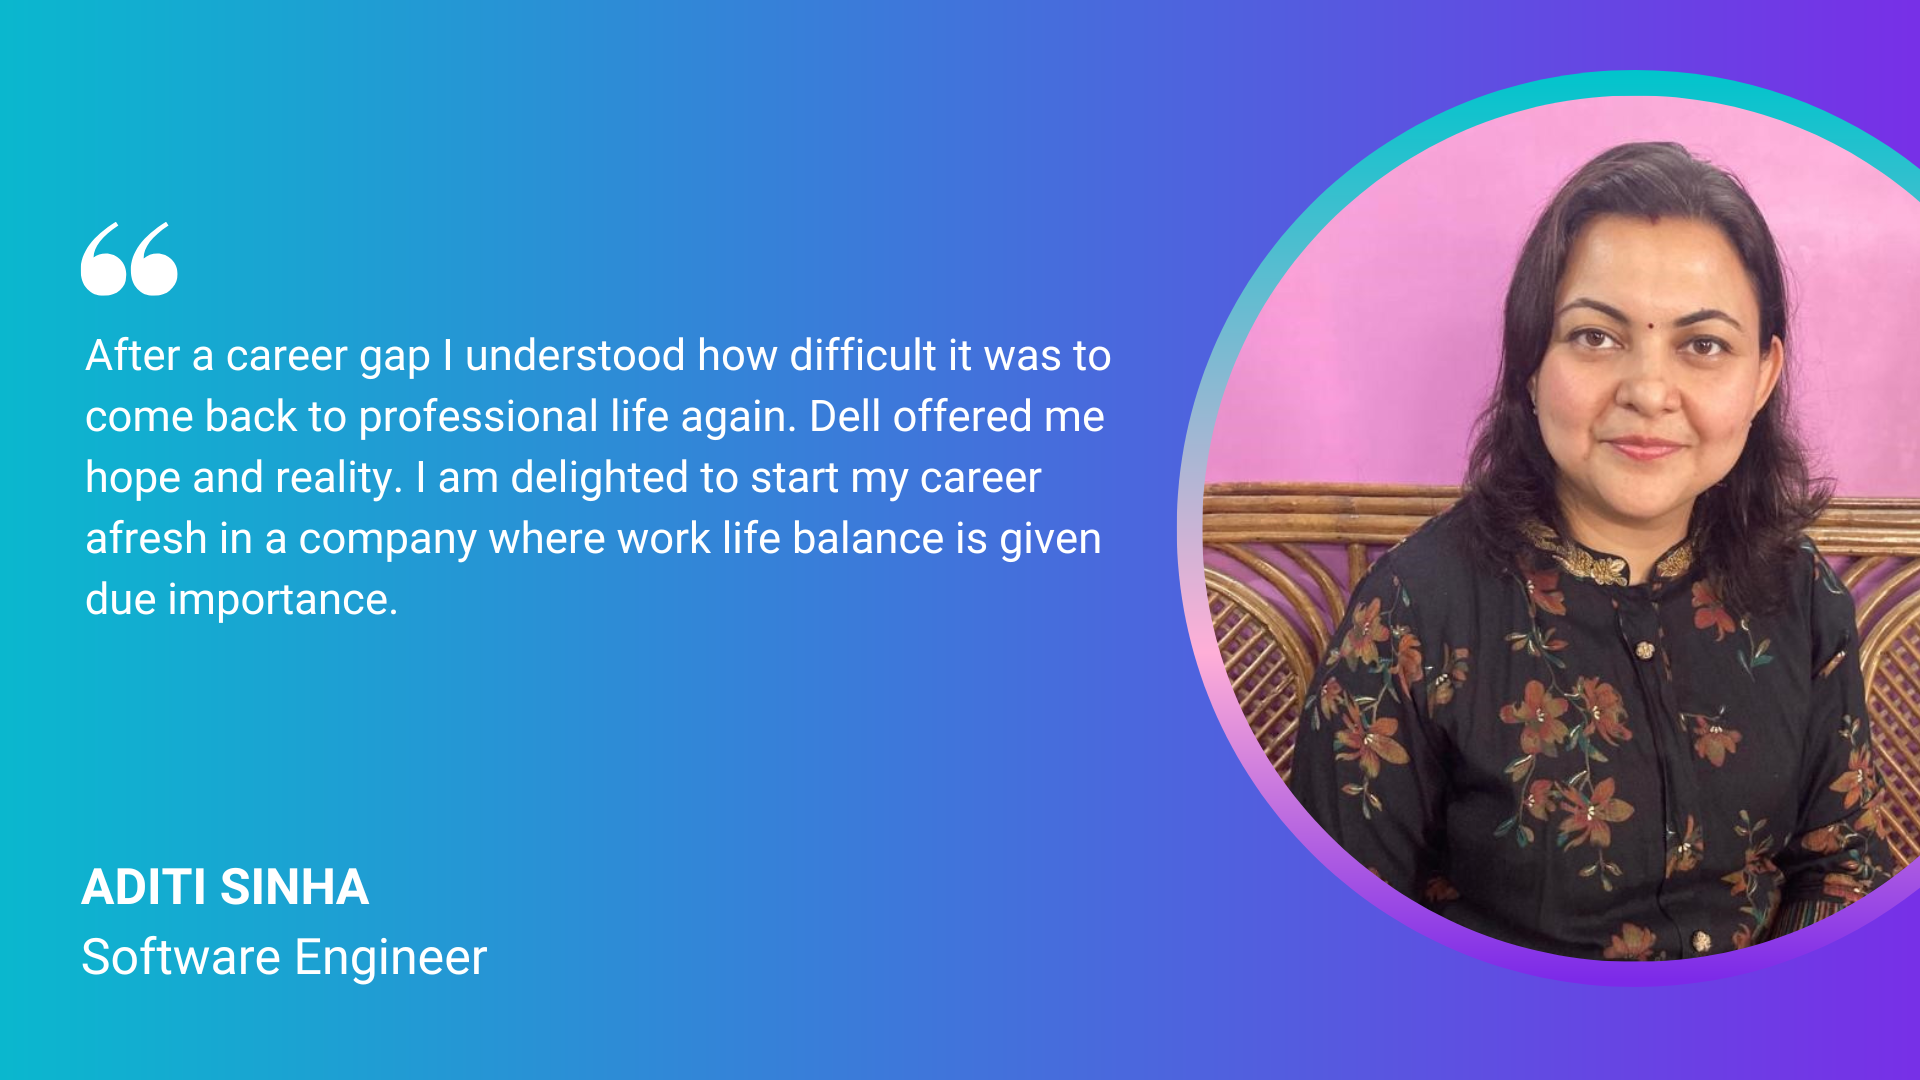 "After a career gap I understood how difficult it was to come back to professional life again. Dell offered me hope and reality. I am delighted to start my career afresh in a company where work life balance is given due importance." Aditi Sinha, Software Engineer